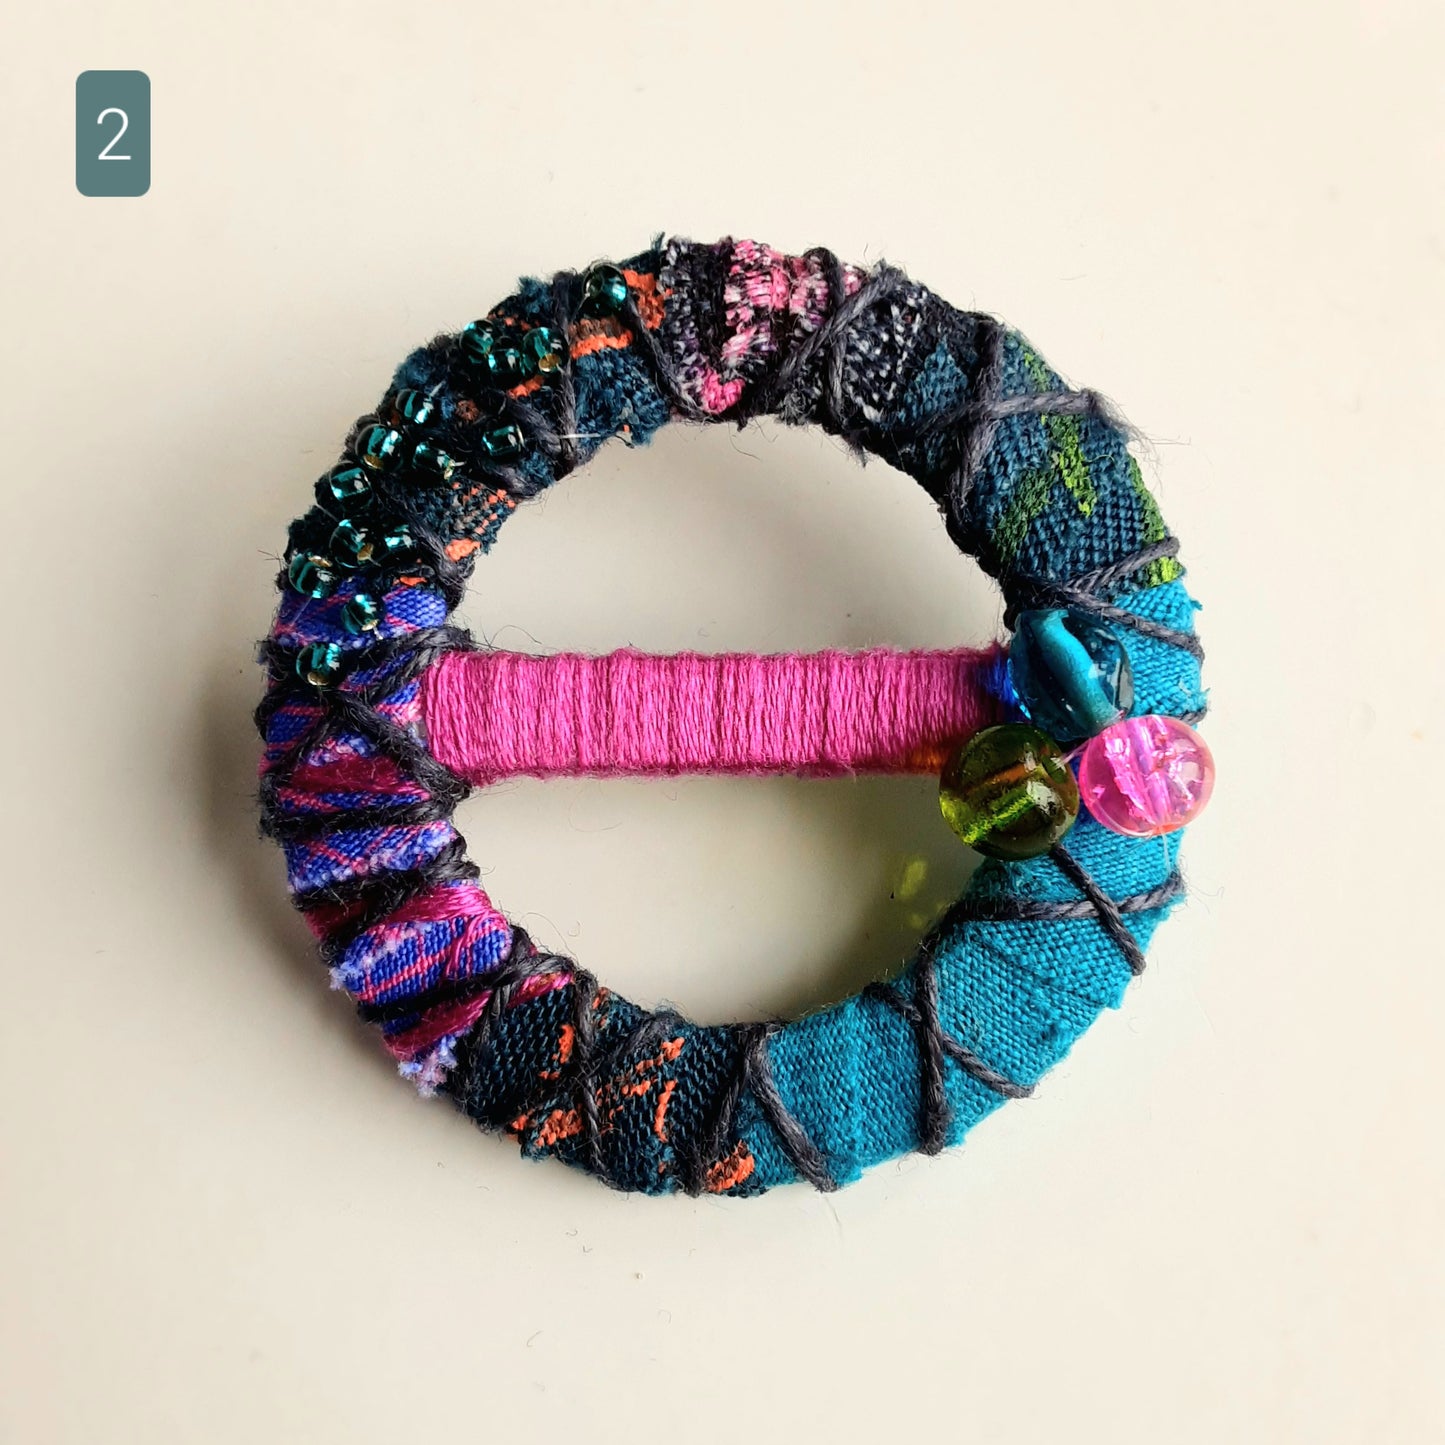 Teal and magenta textile brooch on a white background.